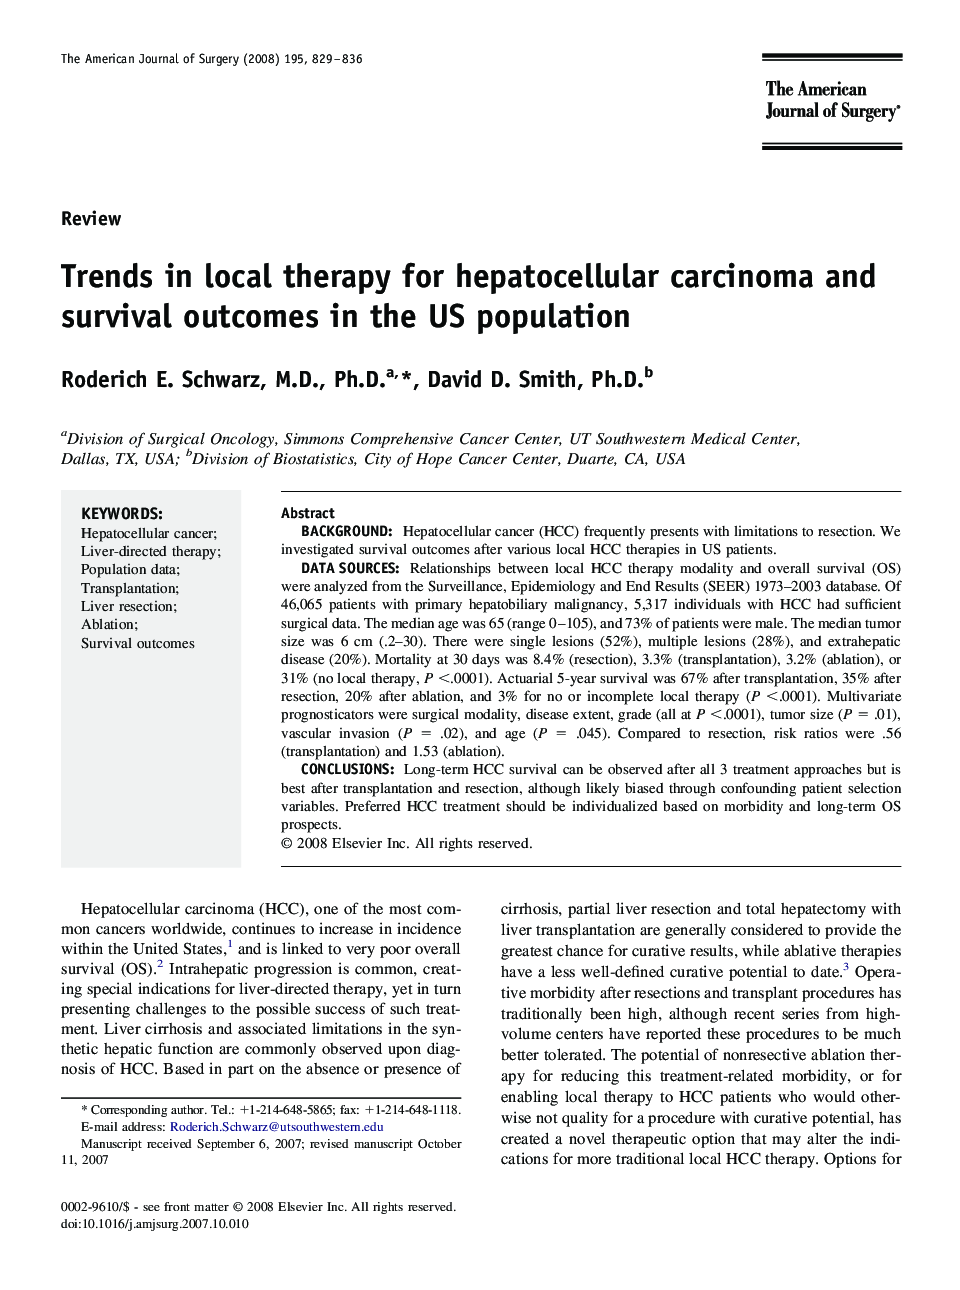 Trends in local therapy for hepatocellular carcinoma and survival outcomes in the US population